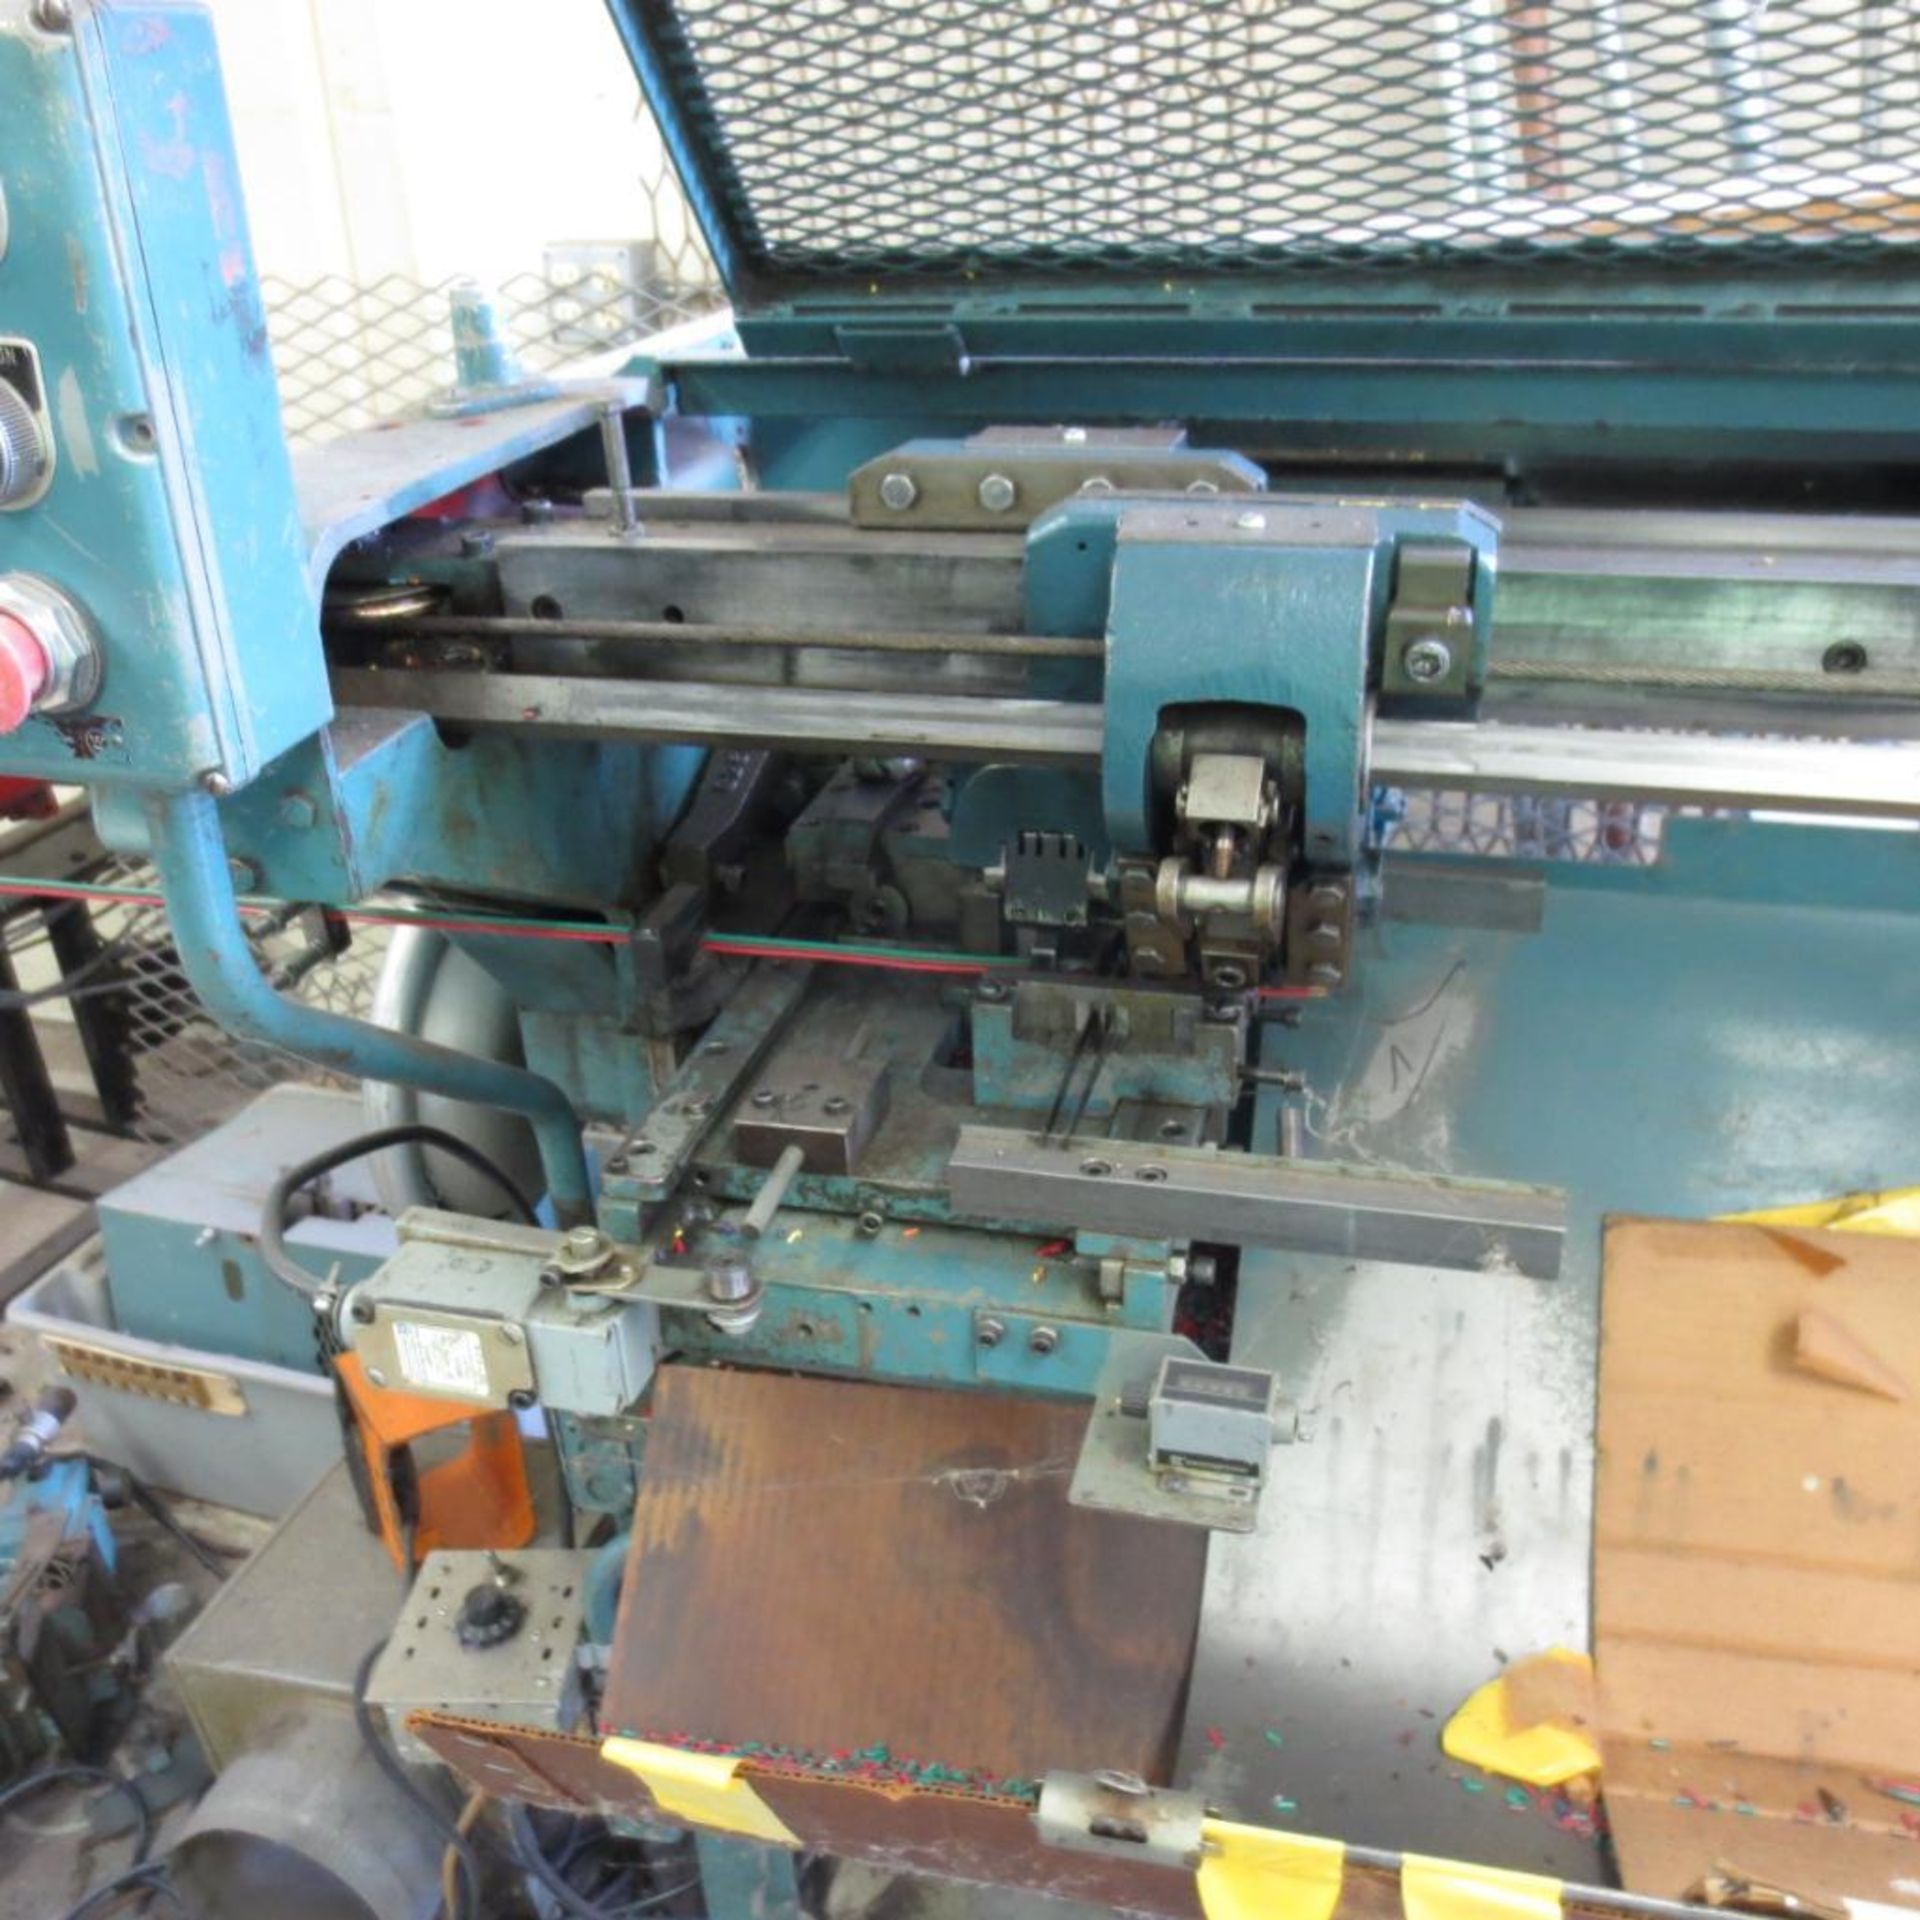 Artos Wire Striping Machine located at 707 Burlington Ave Logansport, IN 46947 - Image 4 of 4